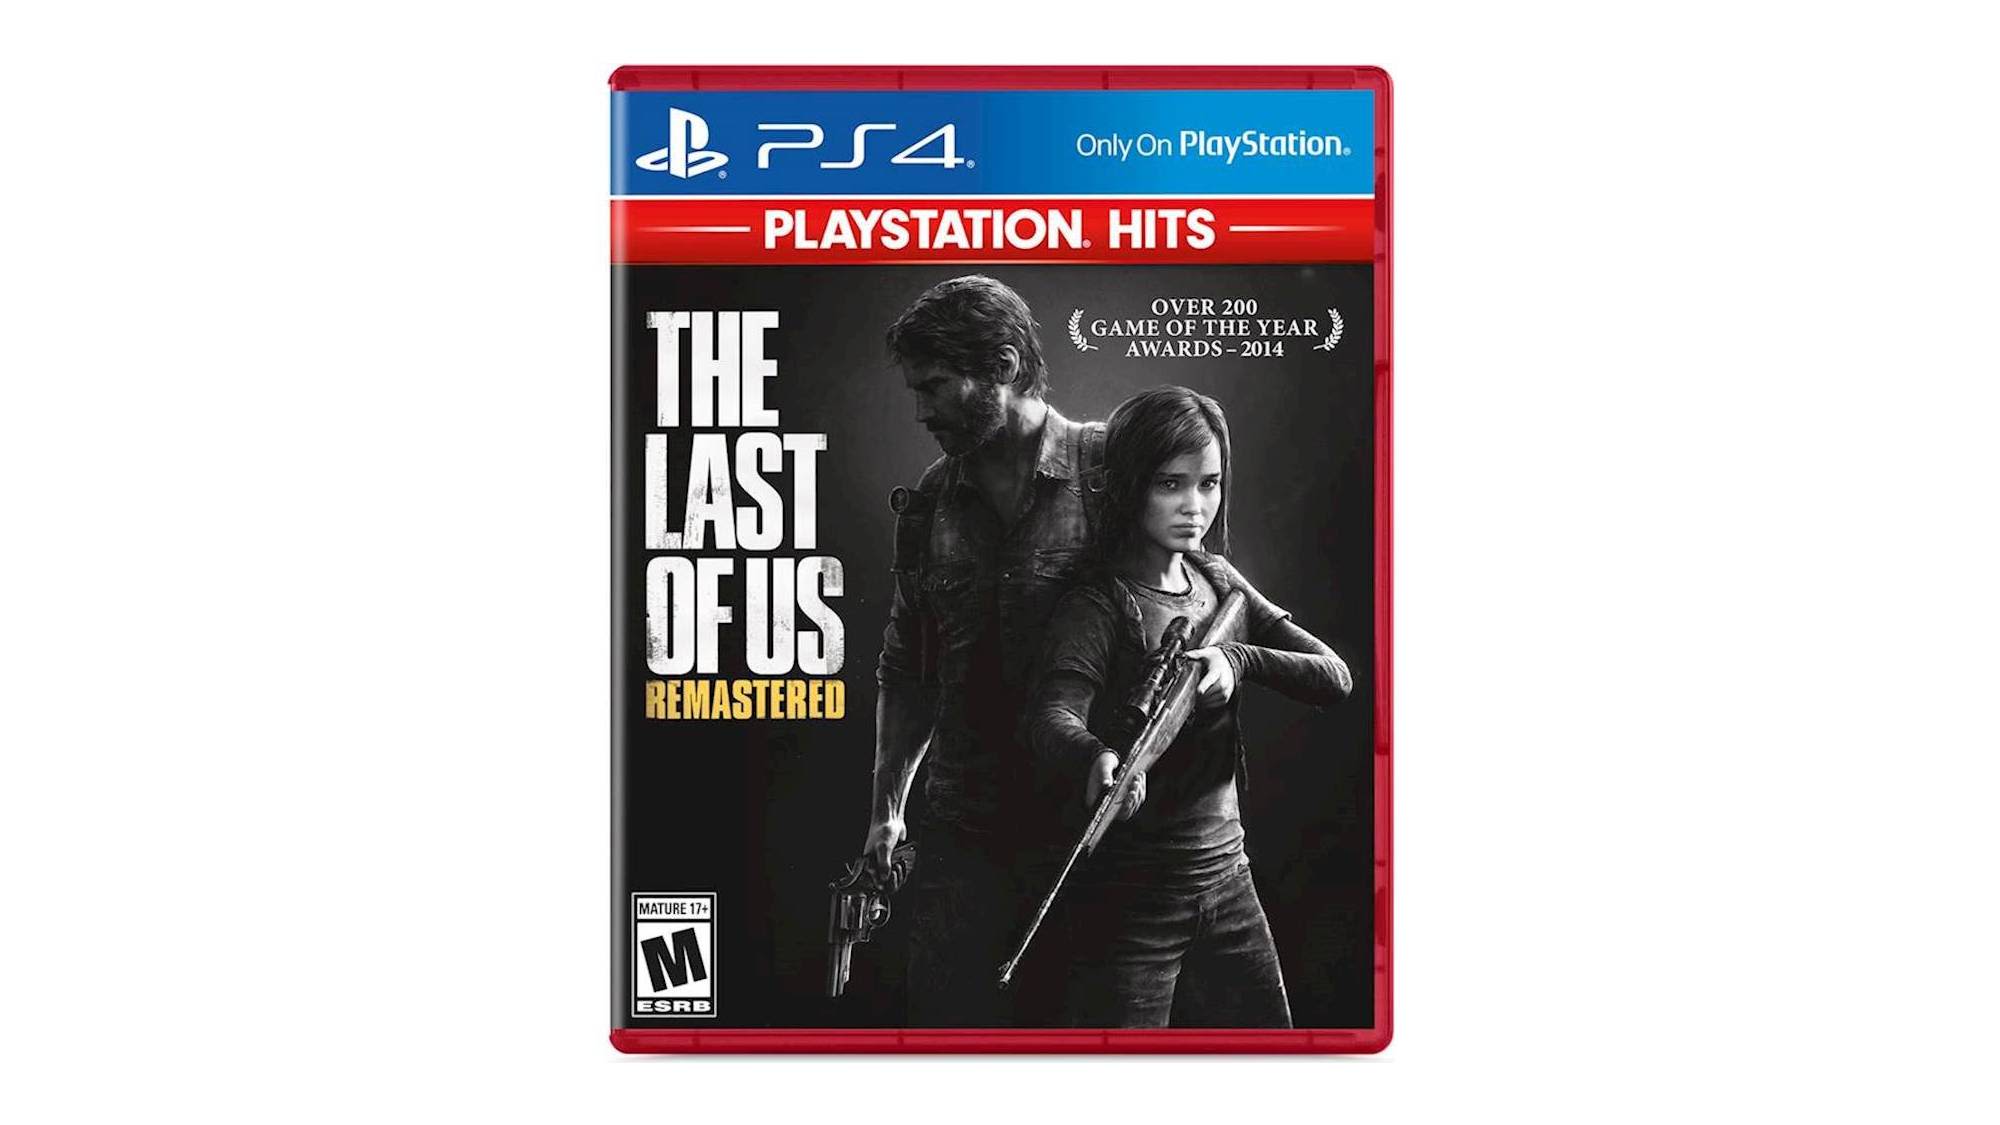 Last of Us, The (PS3) - The Cover Project